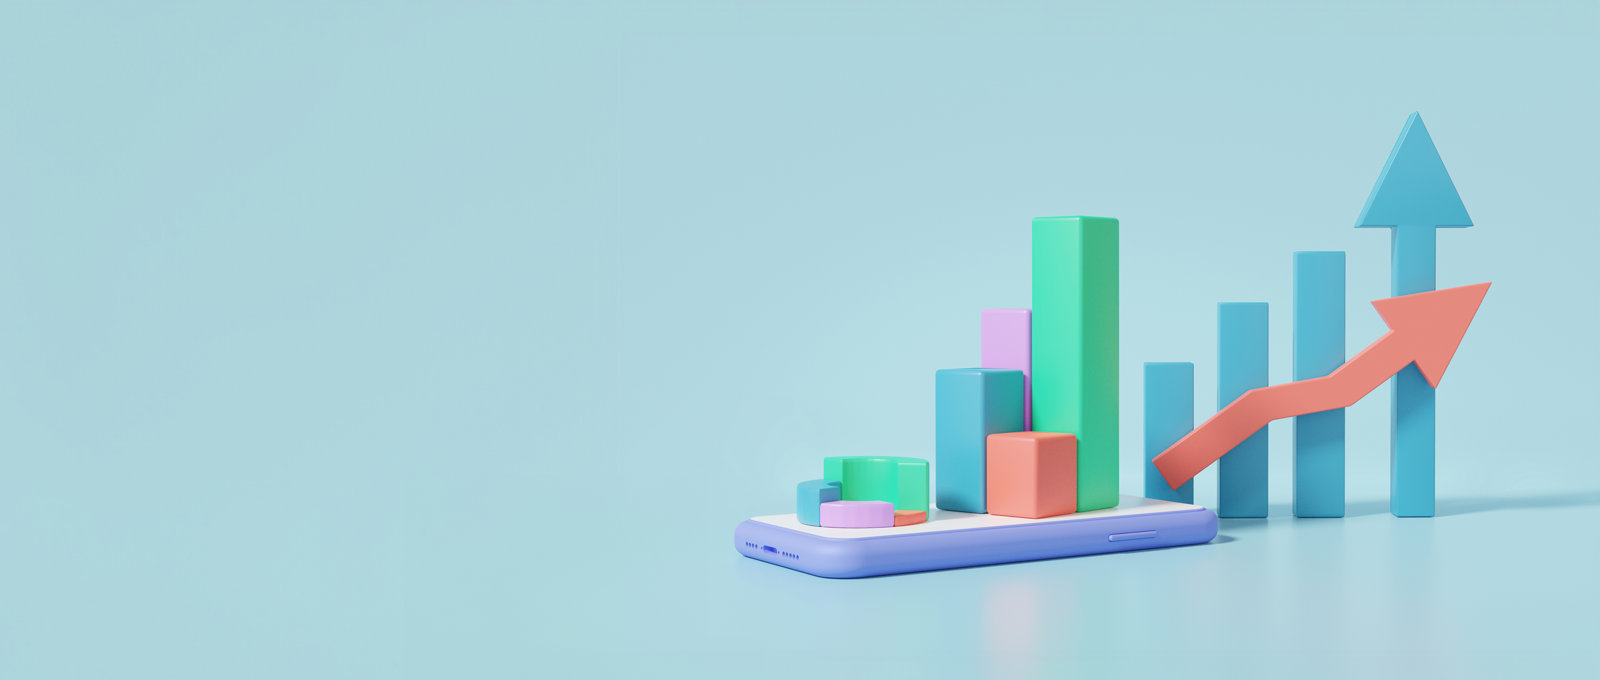 3d graph blocks on light blue background depicting growth